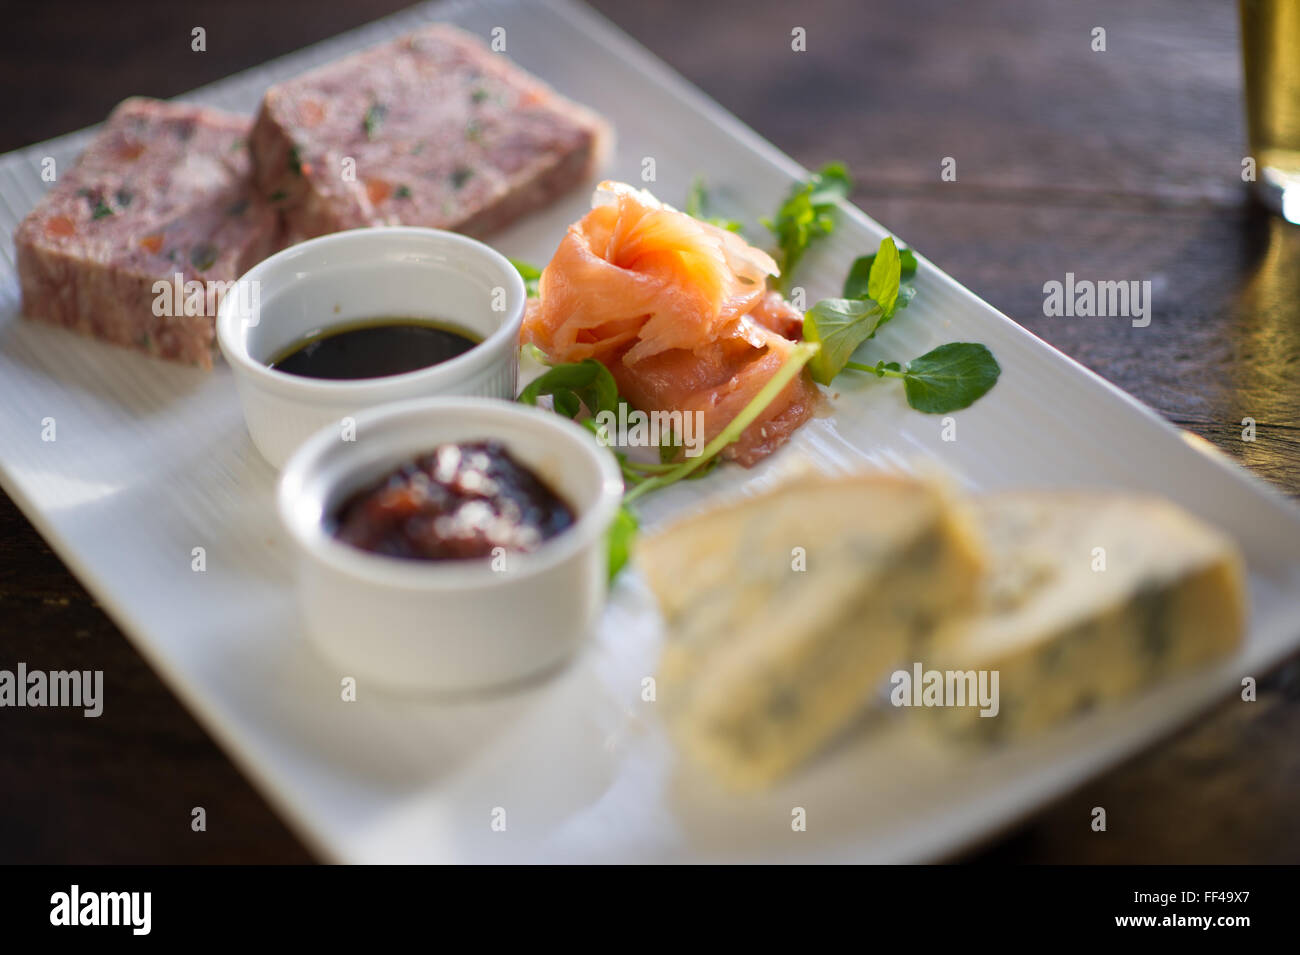 Smoked salmon cheese pate on a plate Stock Photo